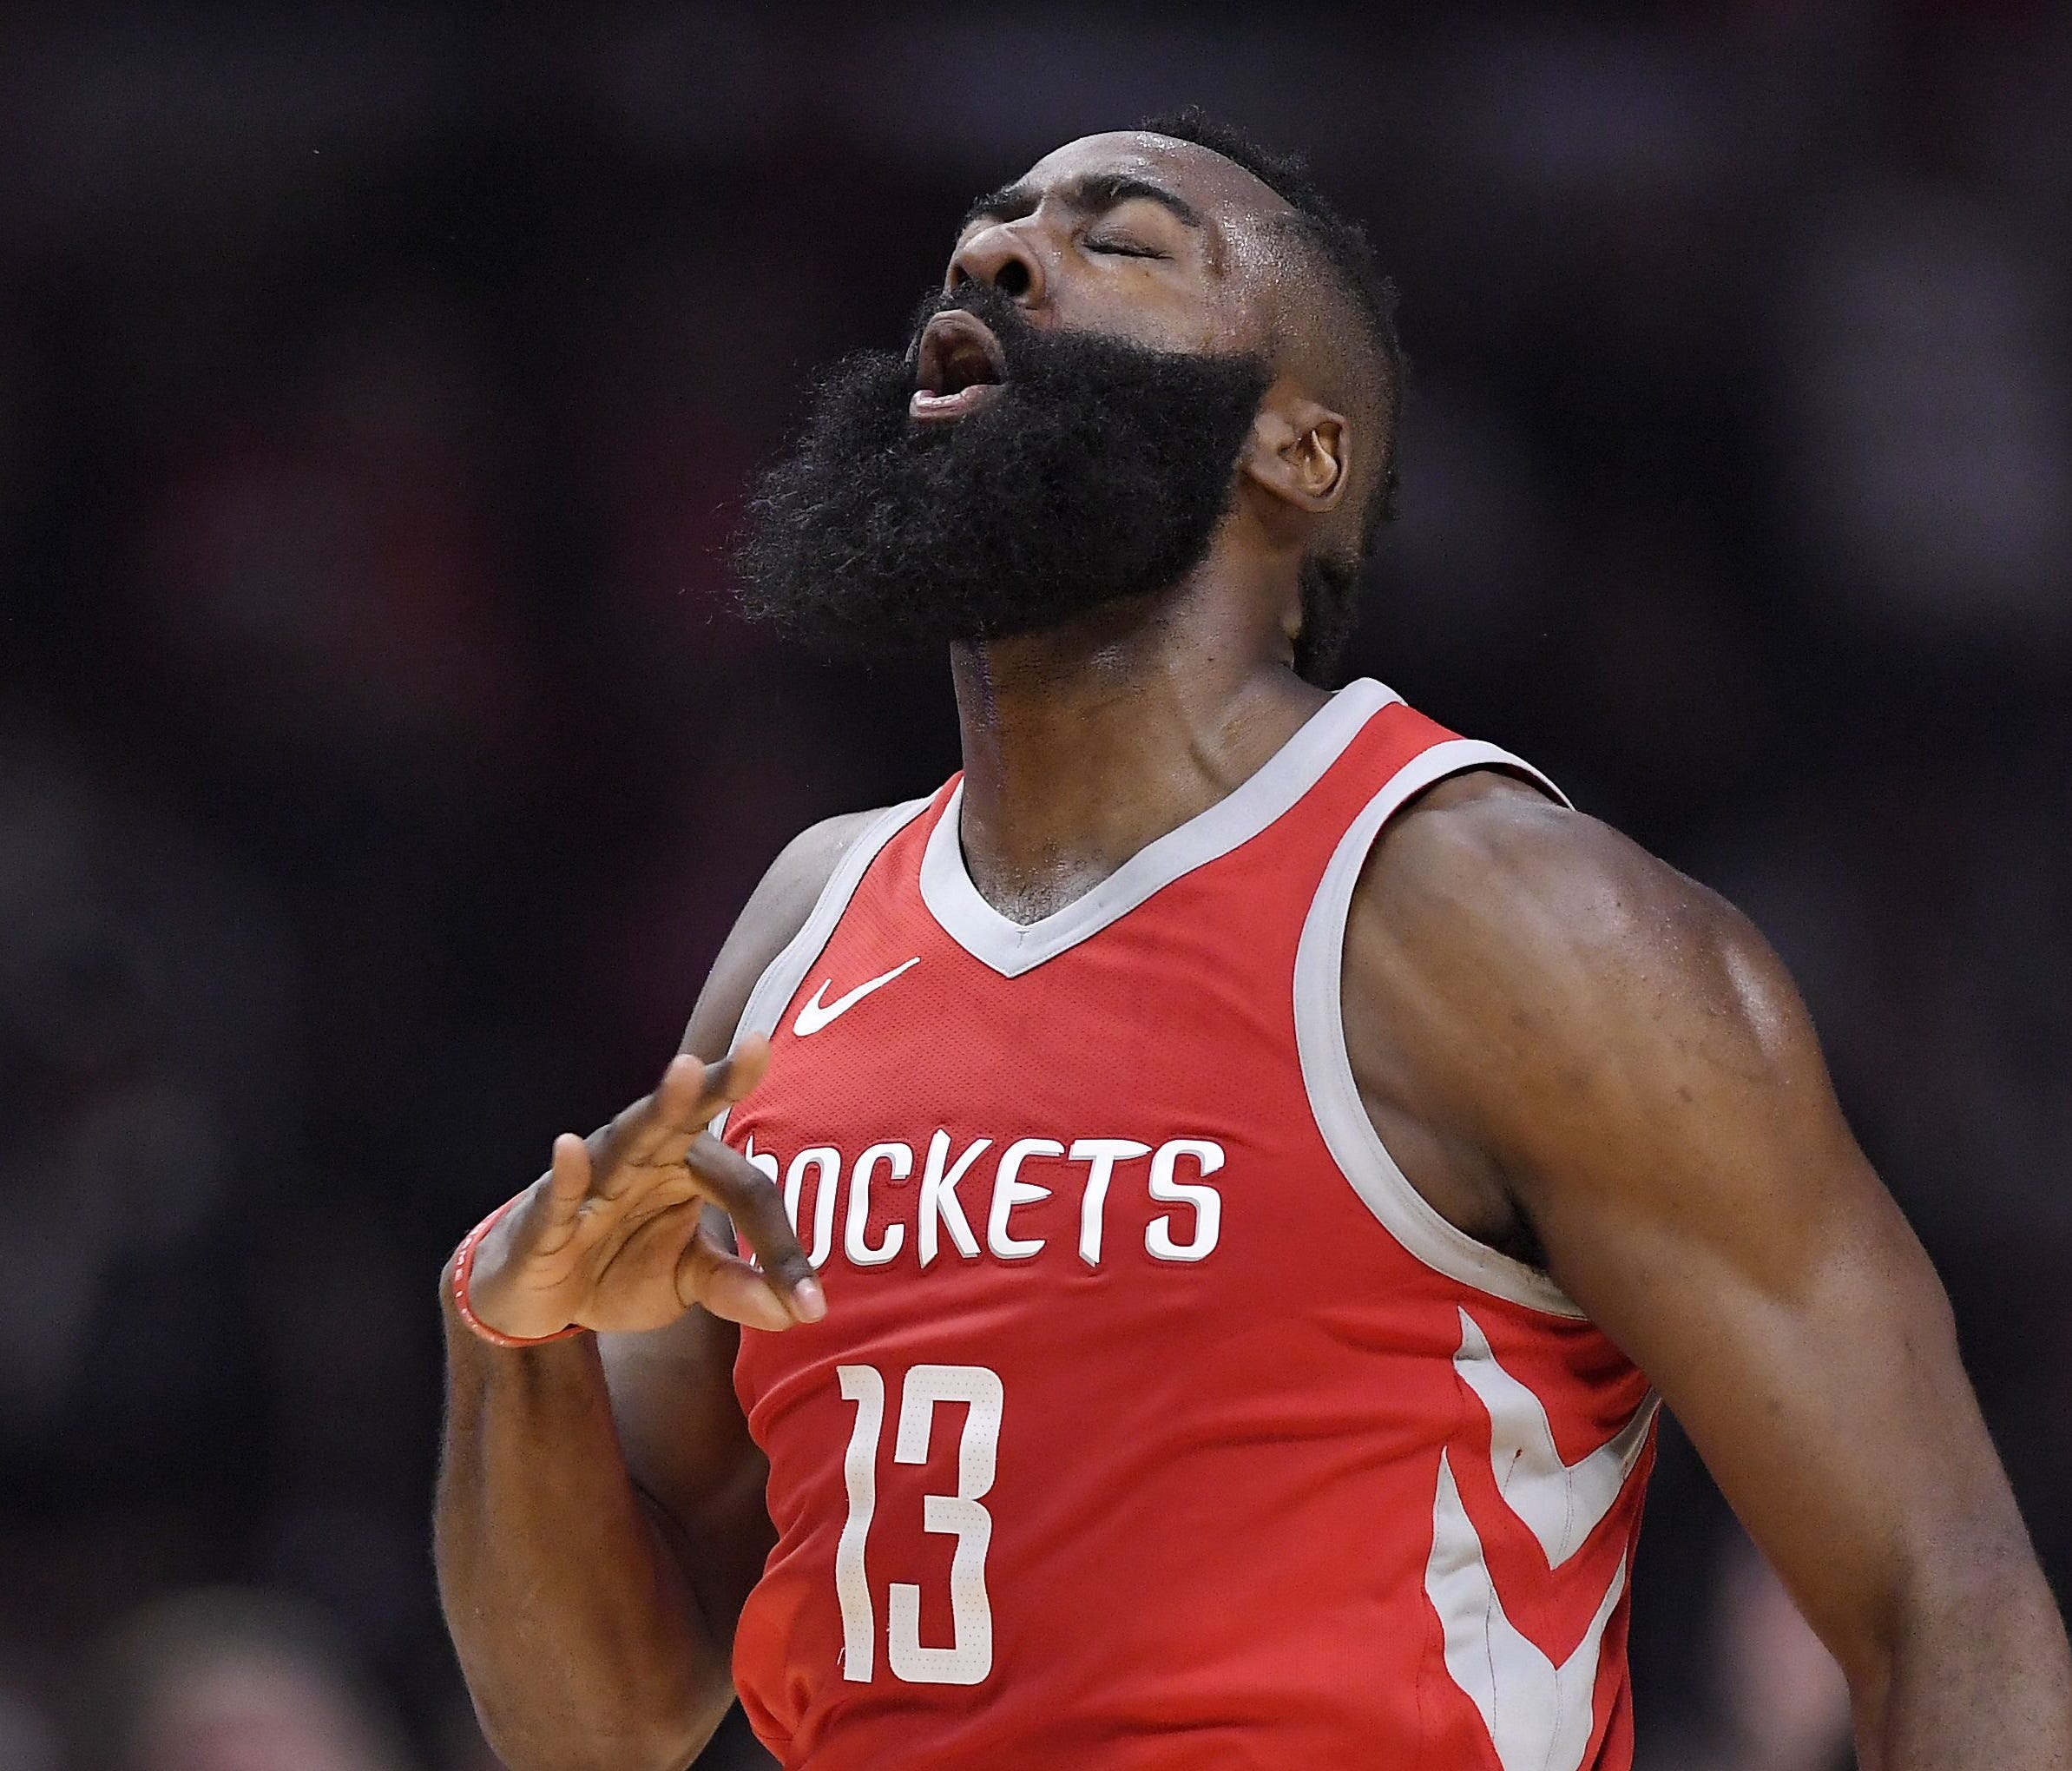 James Harden celebrates after hitting a 3-point shot during the first half against the Clippers.